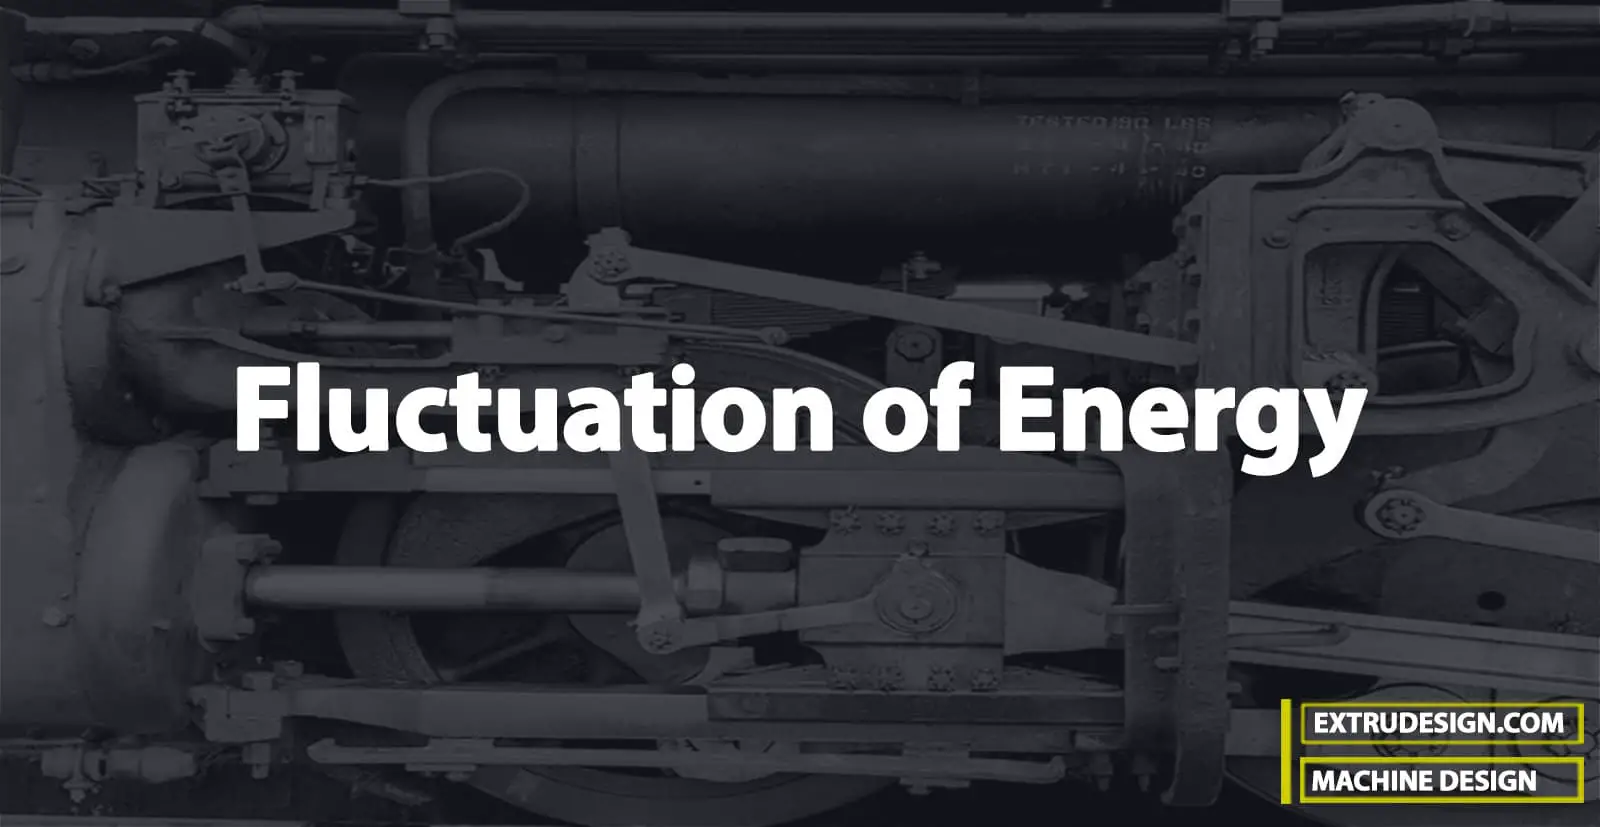 What is the Fluctuation of Energy?